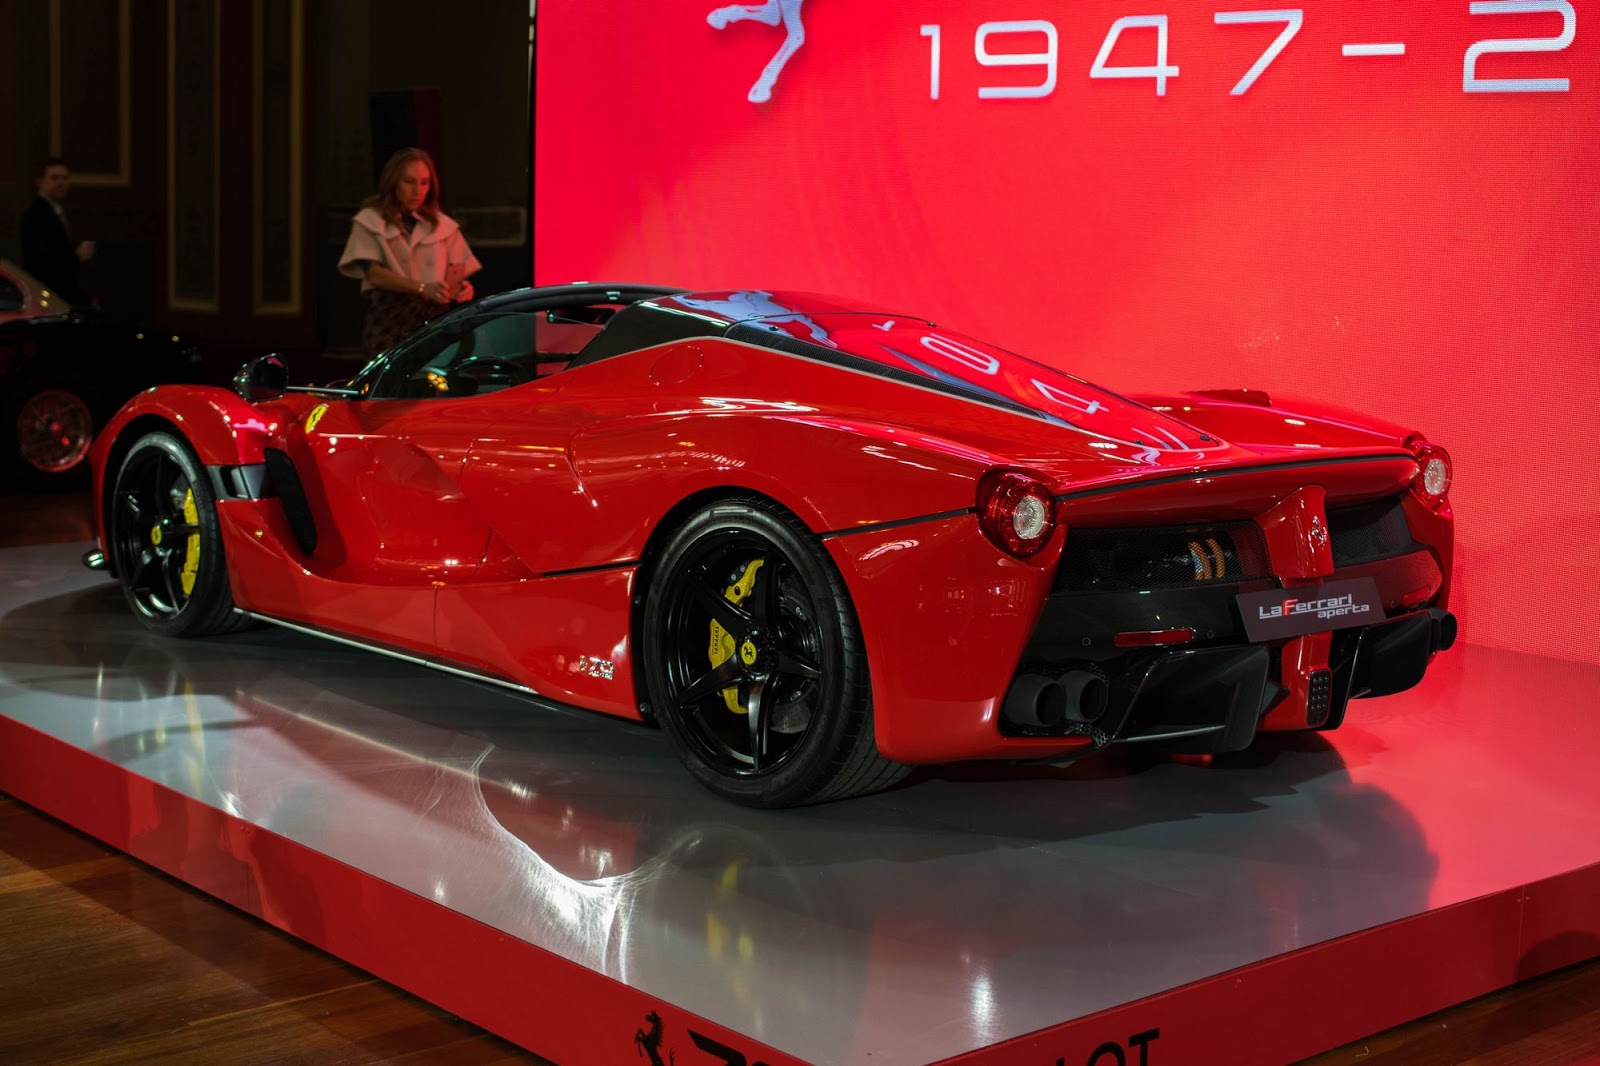 All-Electric Ferrari Supercar Will Leave Its Rivals In The Dust - car news1600 x 1066